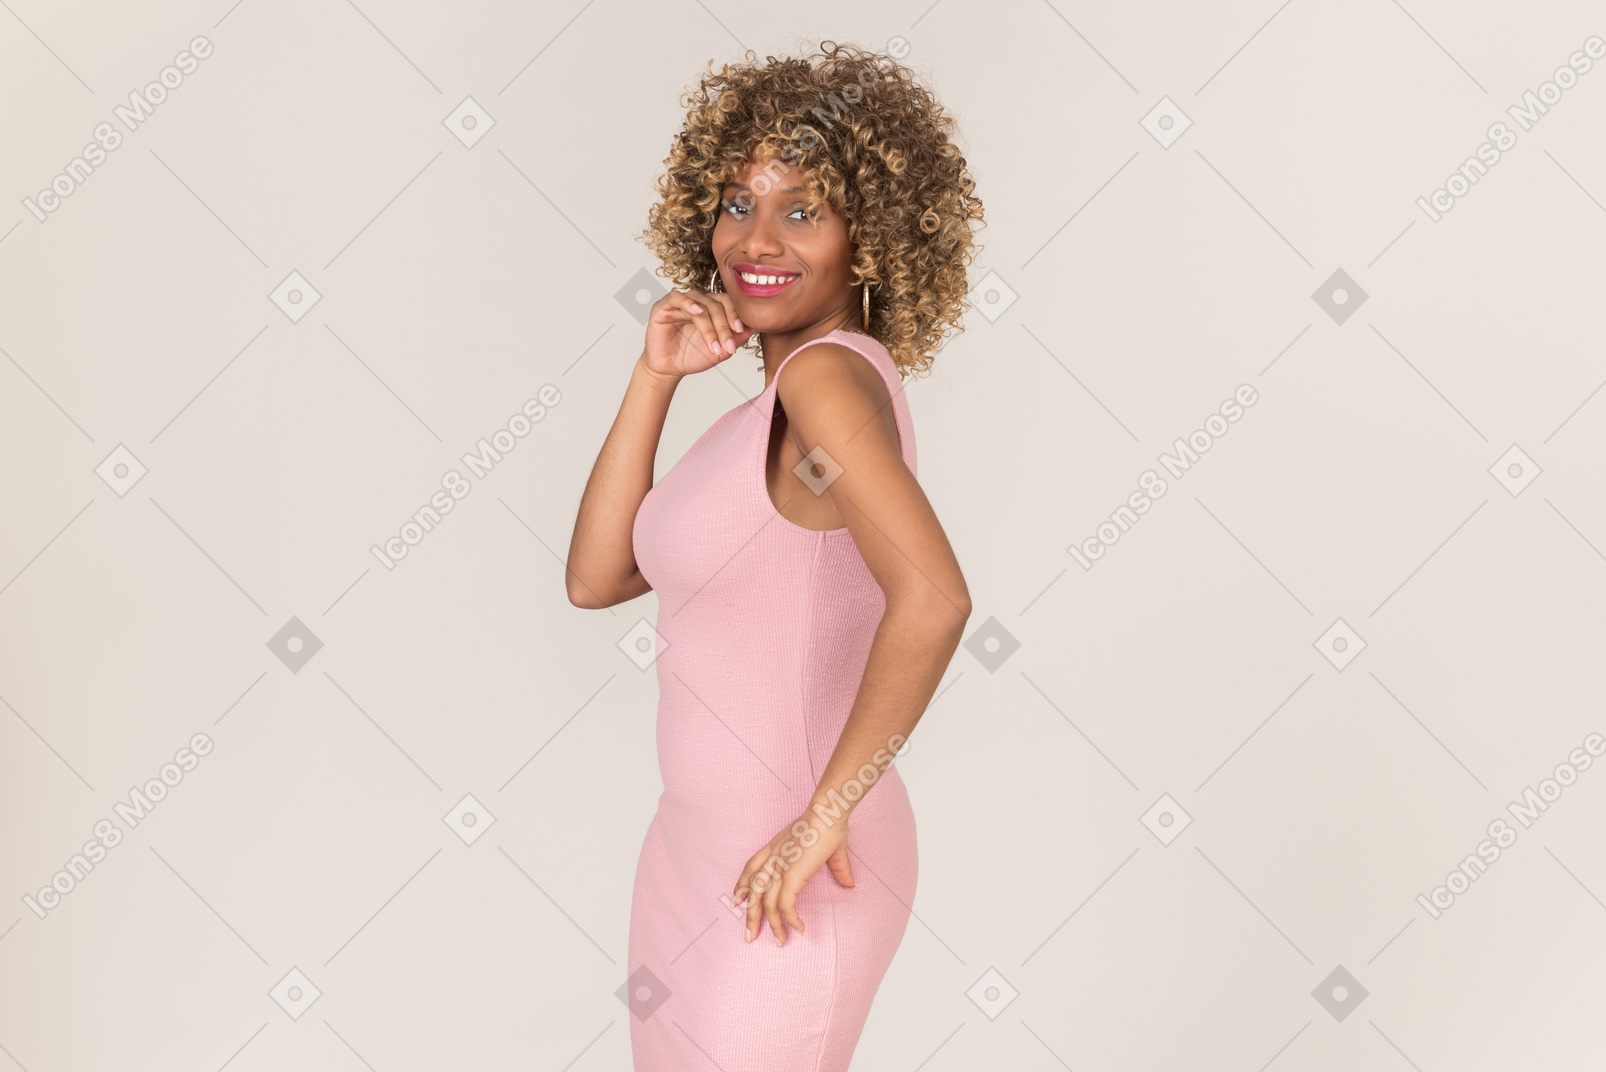 A woman in a pink dress posing for a picture